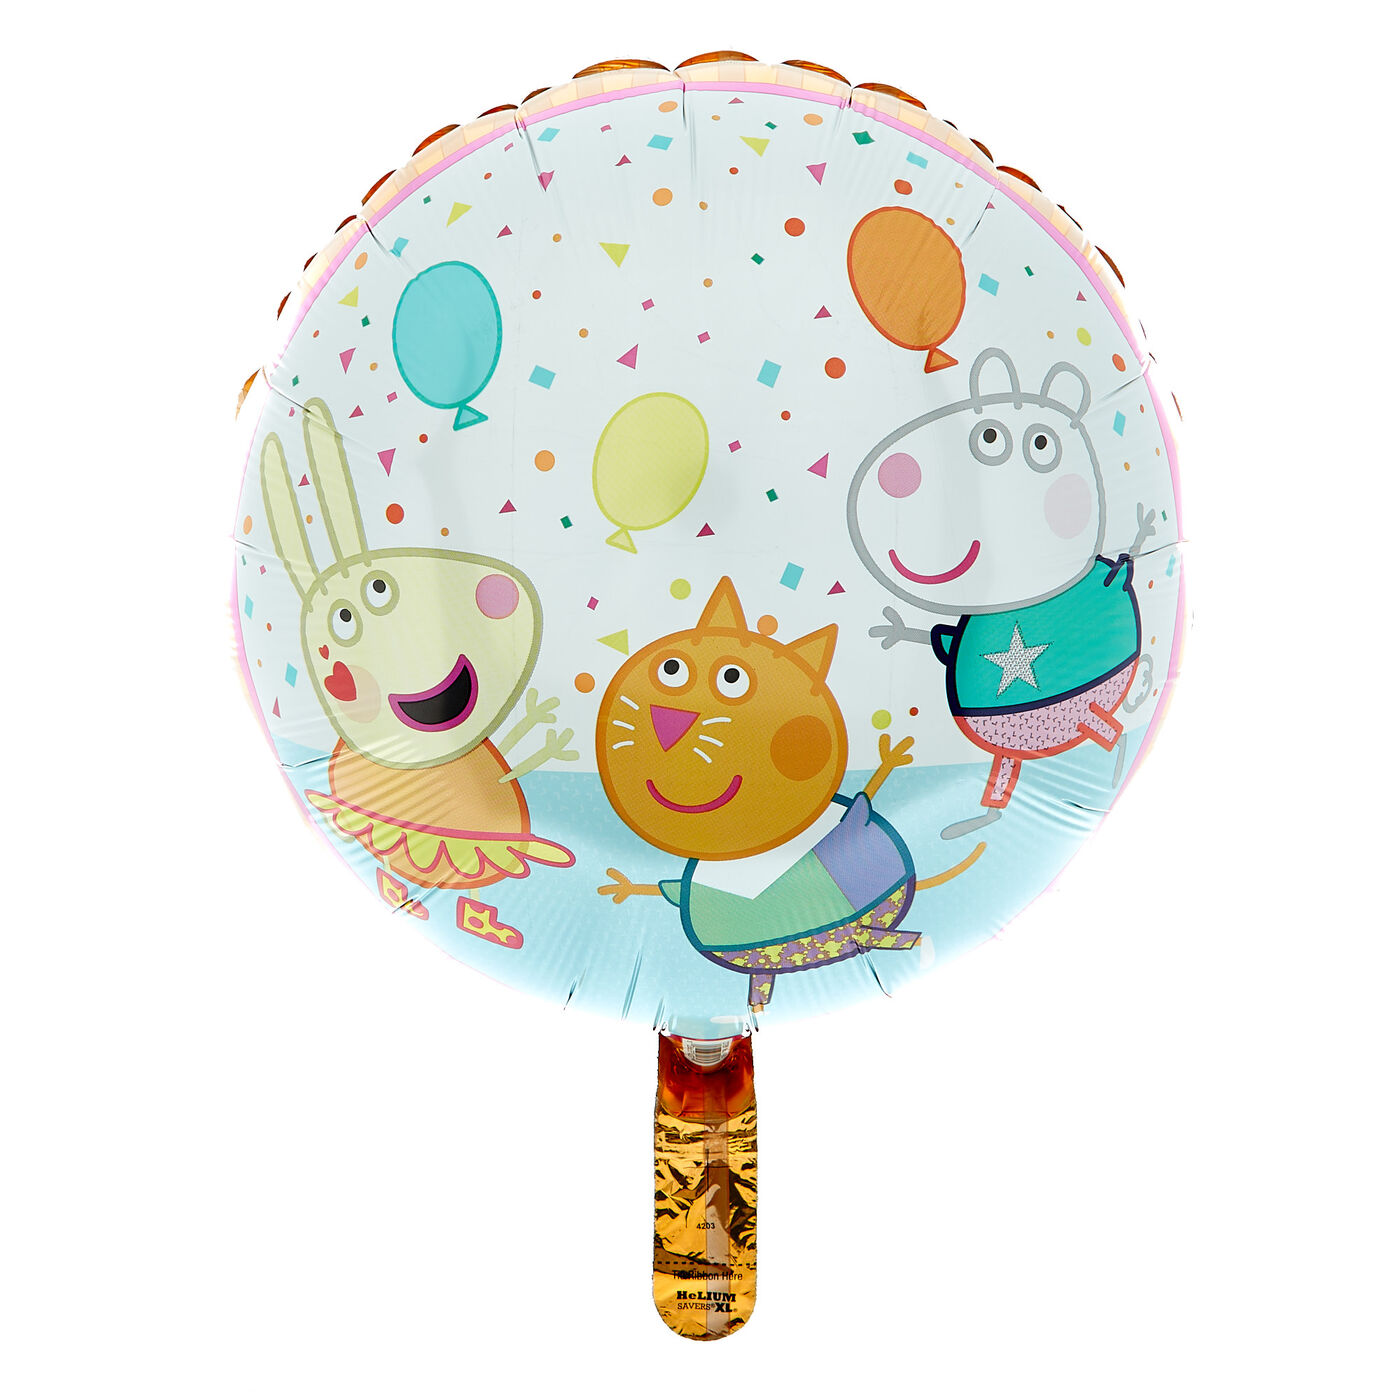 Buy 17-Inch Peppa Pig Round Foil Helium Balloon for GBP 3.99